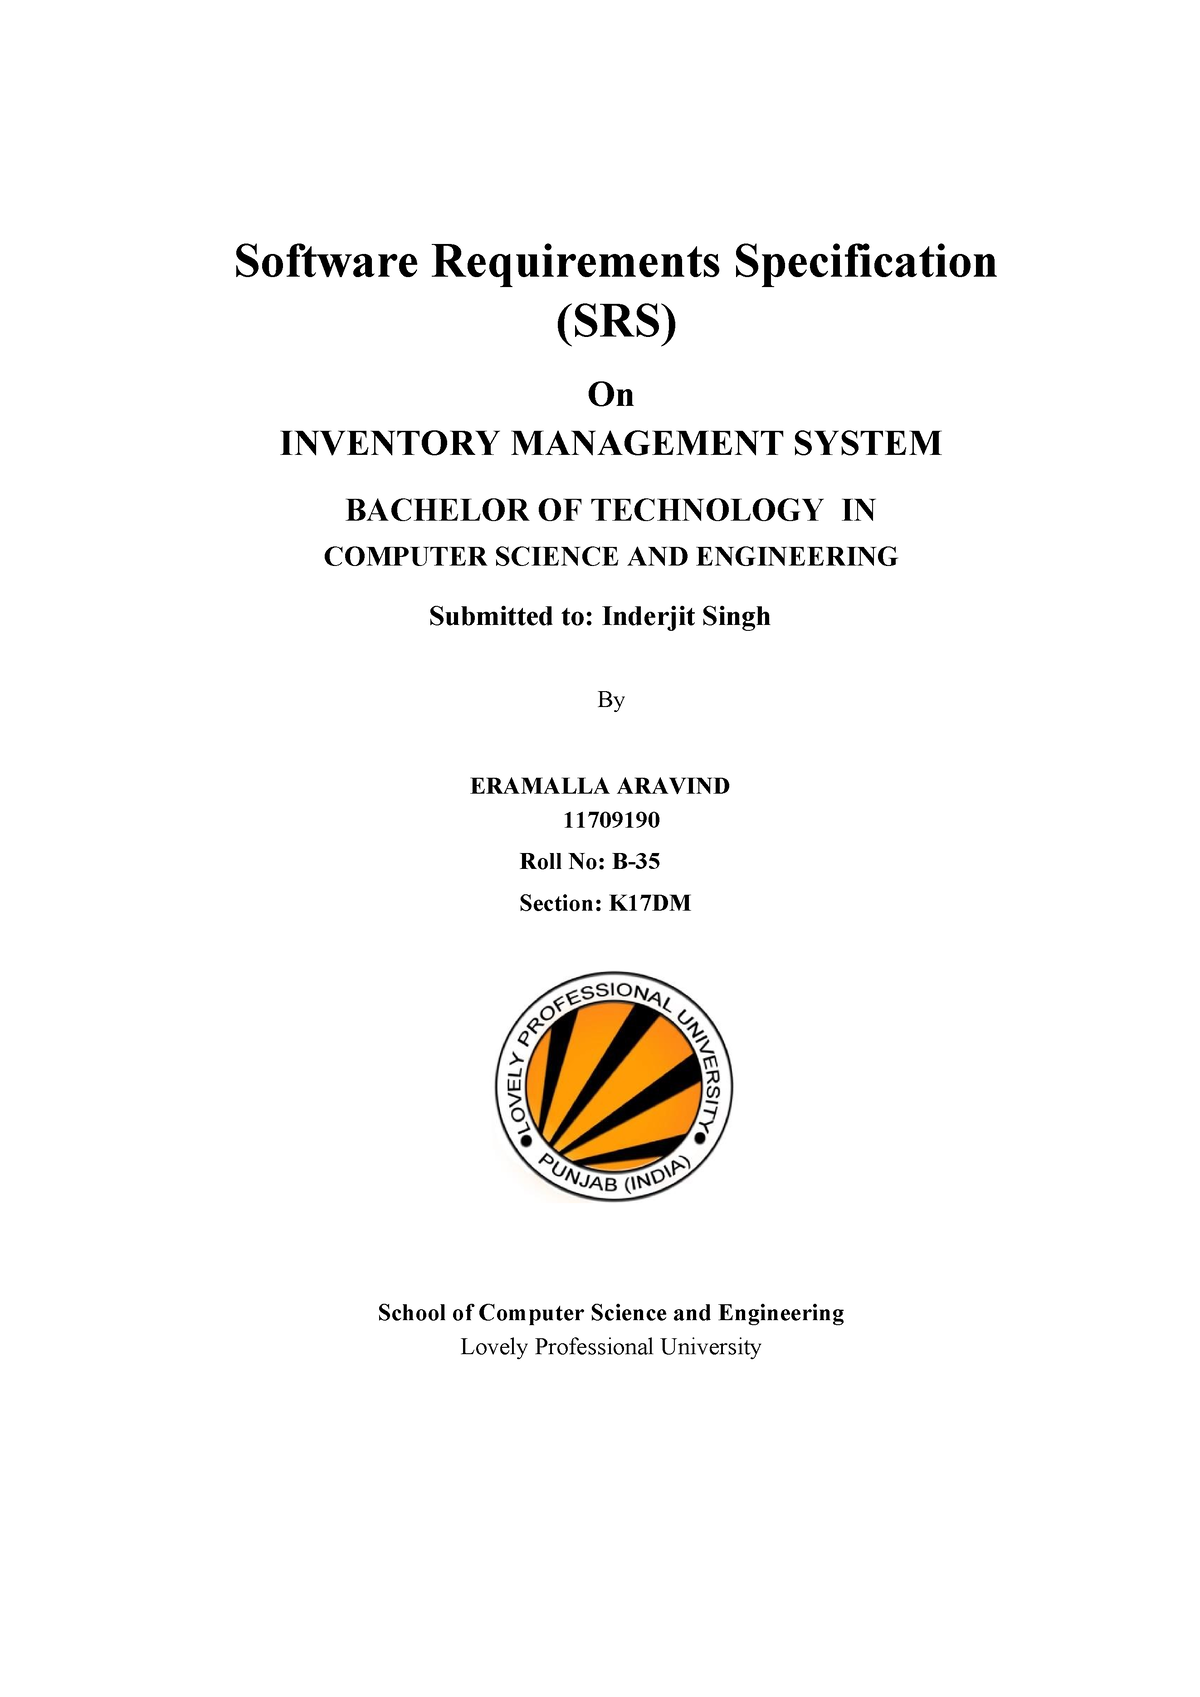 Pdfcoffee - dsfghjkl - Software Requirements Specification (SRS) On ...